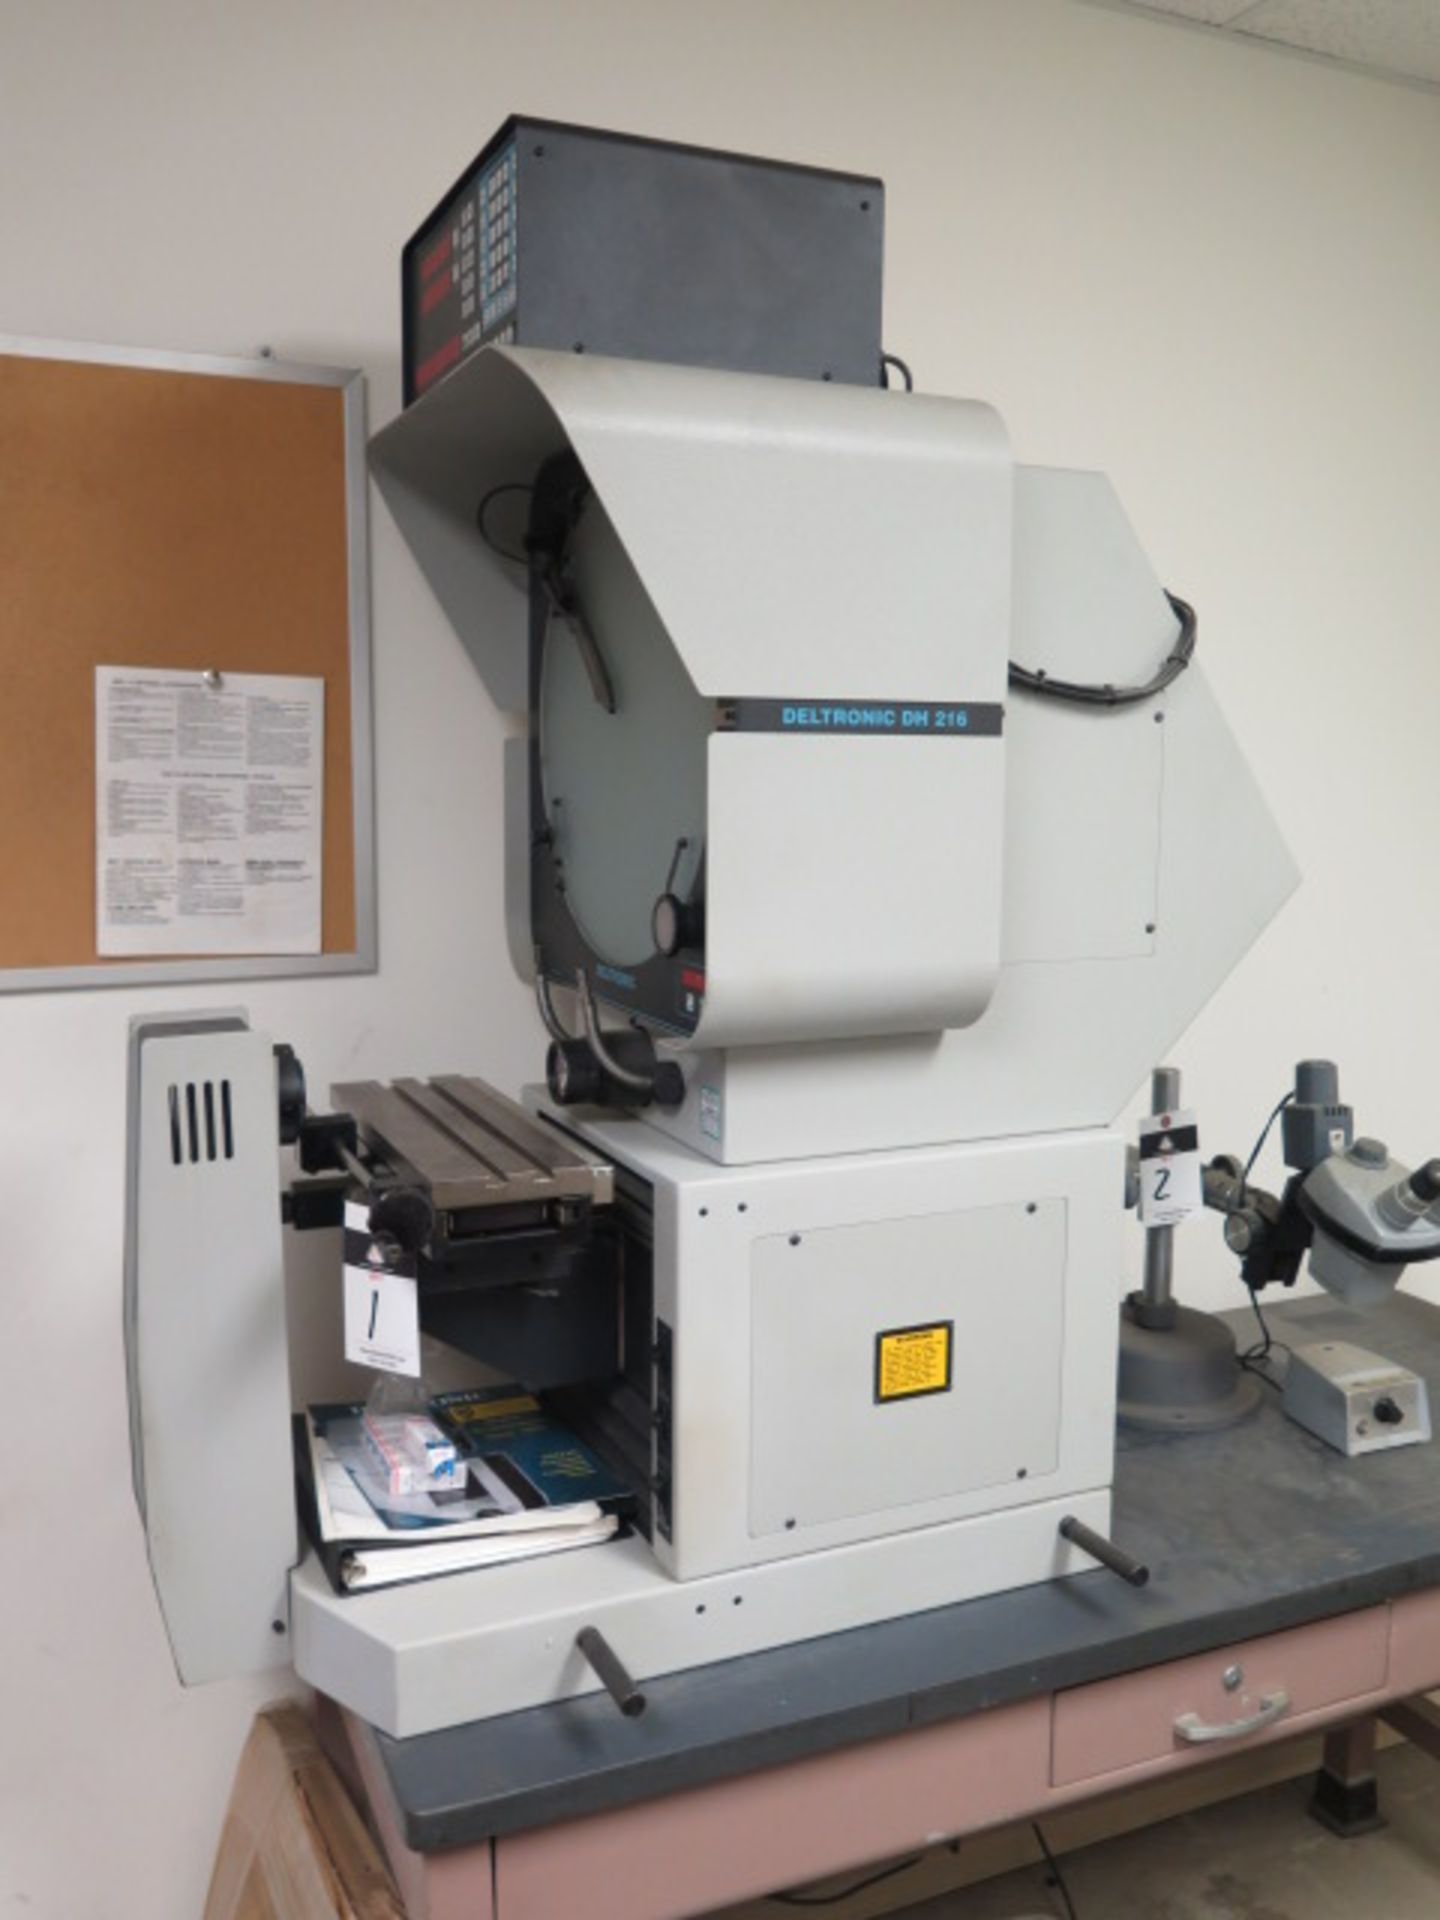 Deltronic DH216MPC5 16” Optical Comparator s/n 389075949 w/ MPC-5 Programmable DRO, Digital - Image 2 of 13